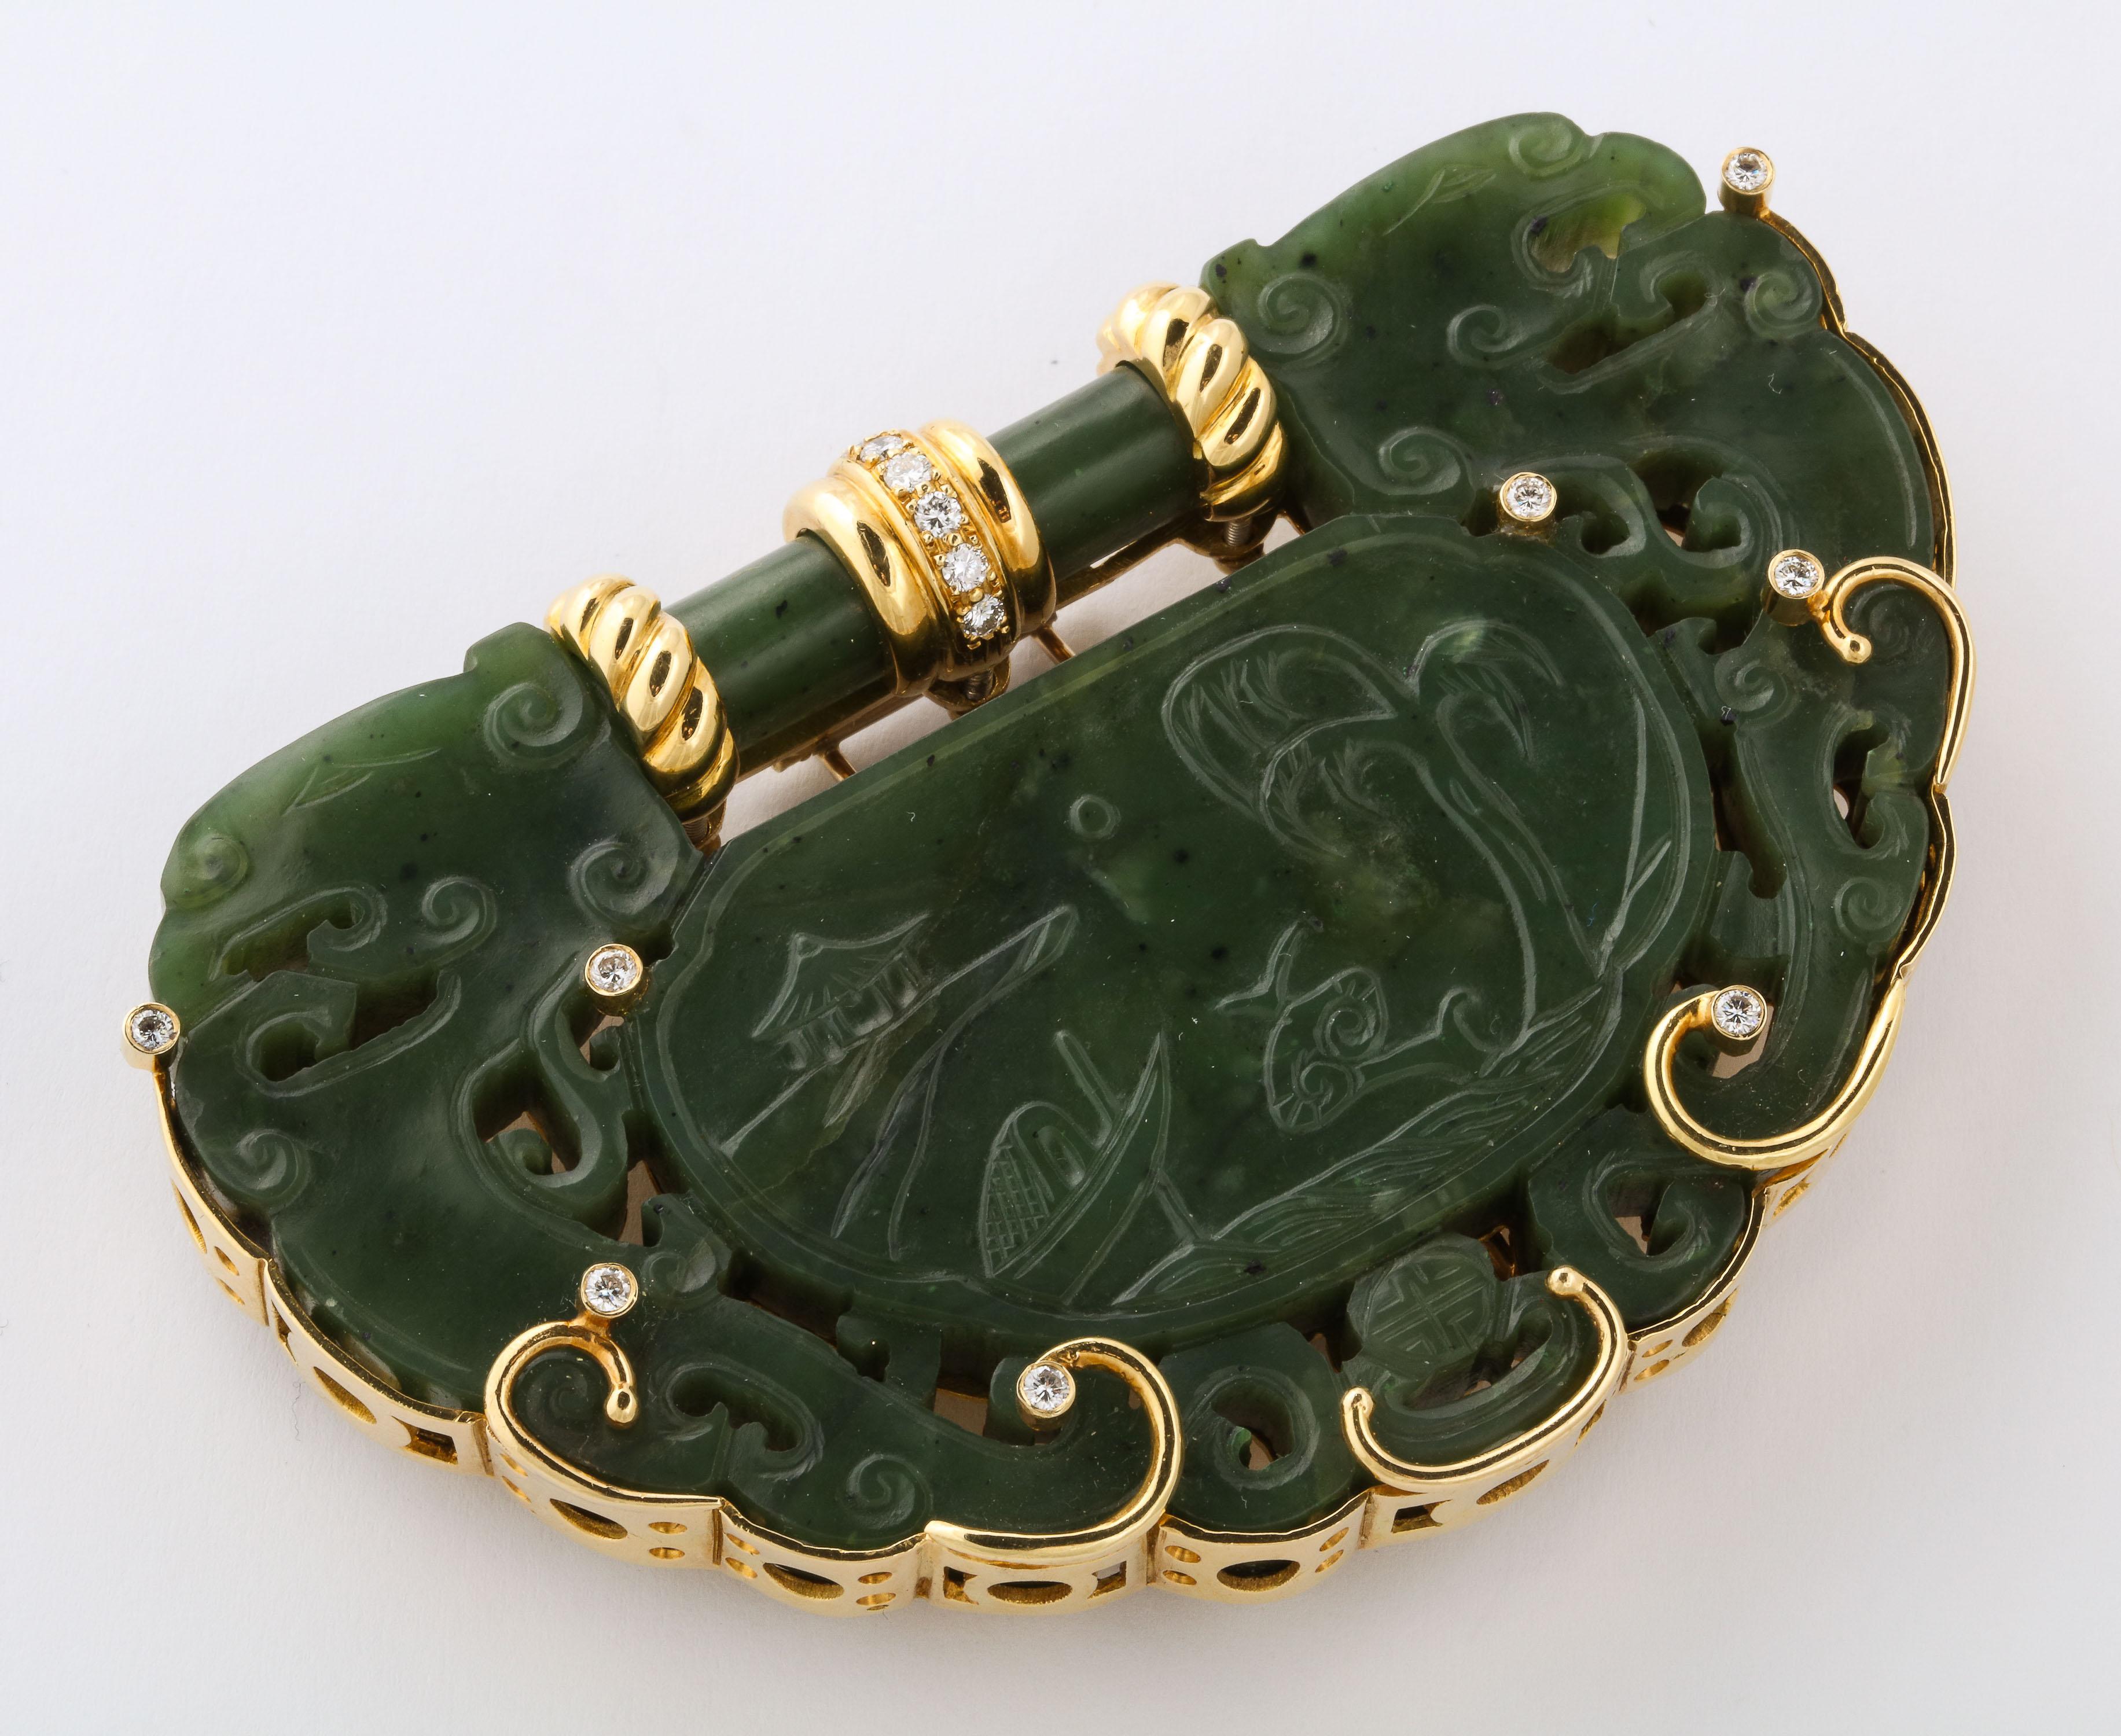 Hand made 18kt kt Yellow Gold Oversize Clip set around a Nephrite Jade Pierced and Decorated Chinese Carving which depicts a water scene with associated cloud elements.
Piece Late 18th/19thCentury.  Mounting - custom made Ca 1940/60.  Set with 2